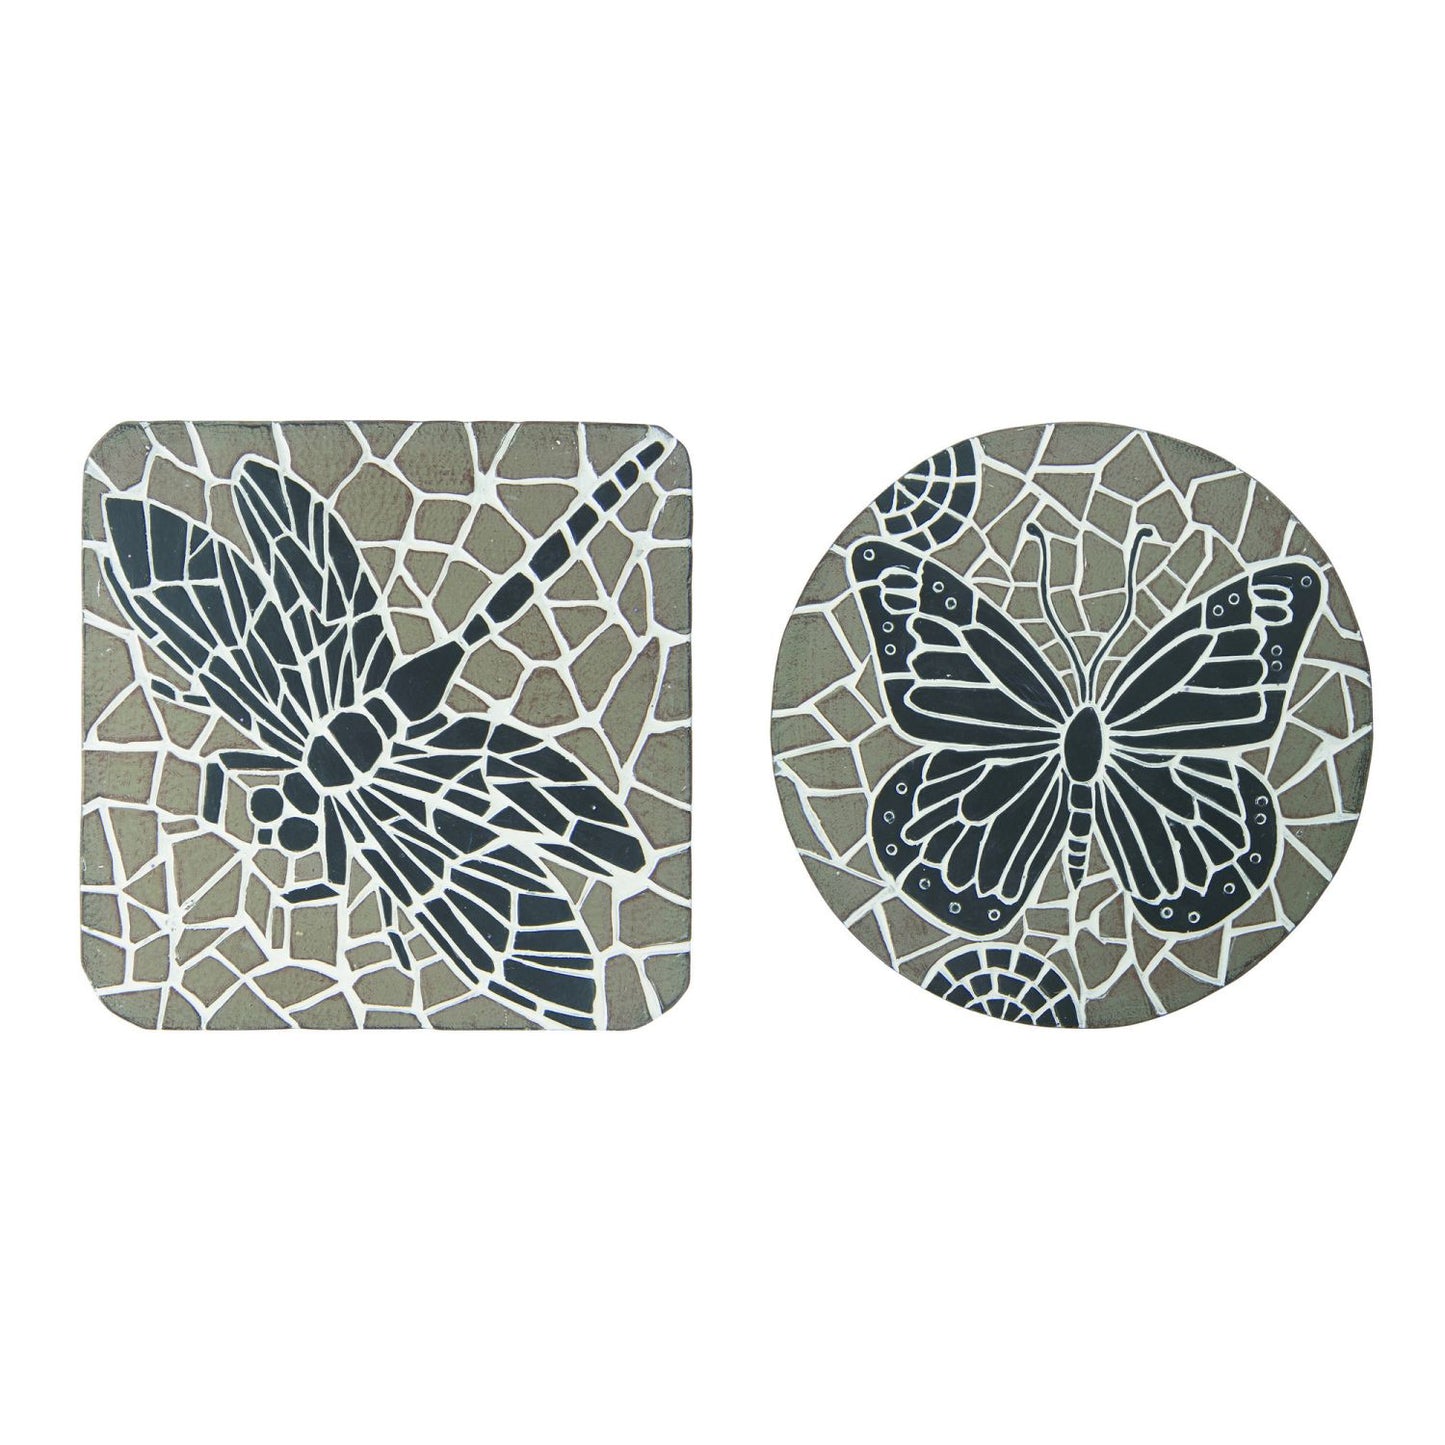 Transpac Cement Mosaic Butterfly & Dragonfly Stepping Stone, Set Of 2 Assortment